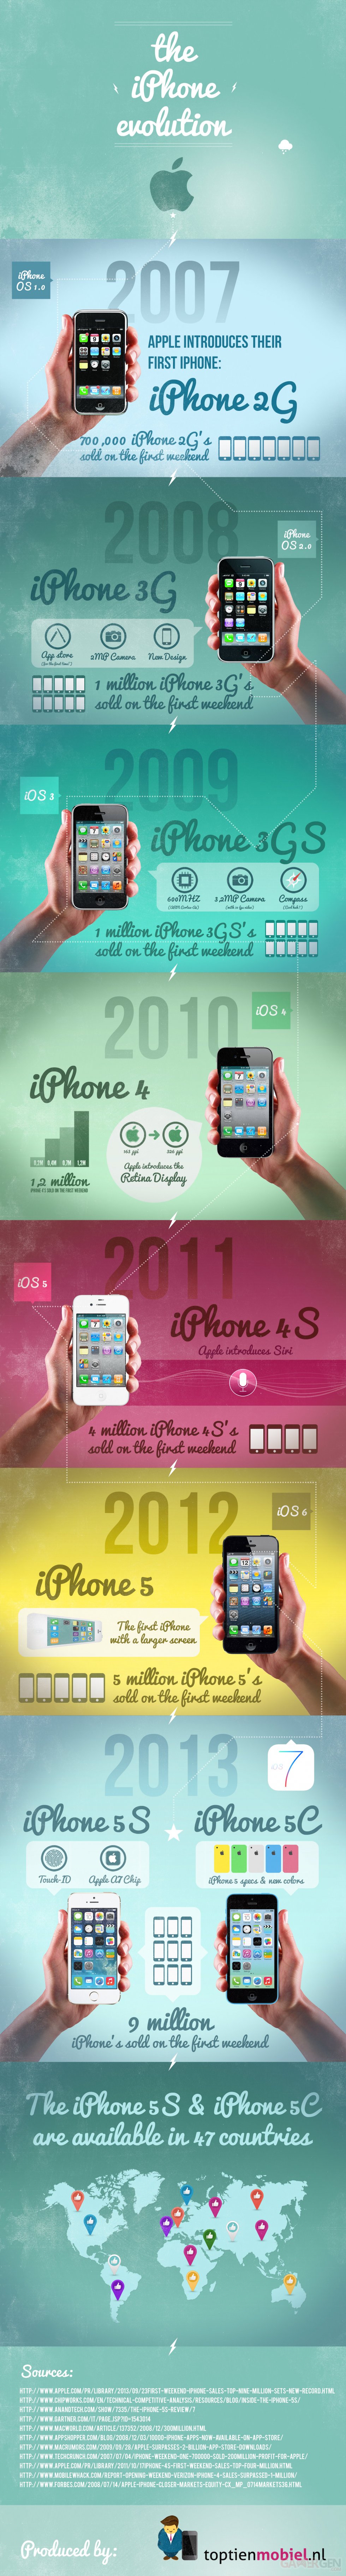 evolution-of-the-iphone